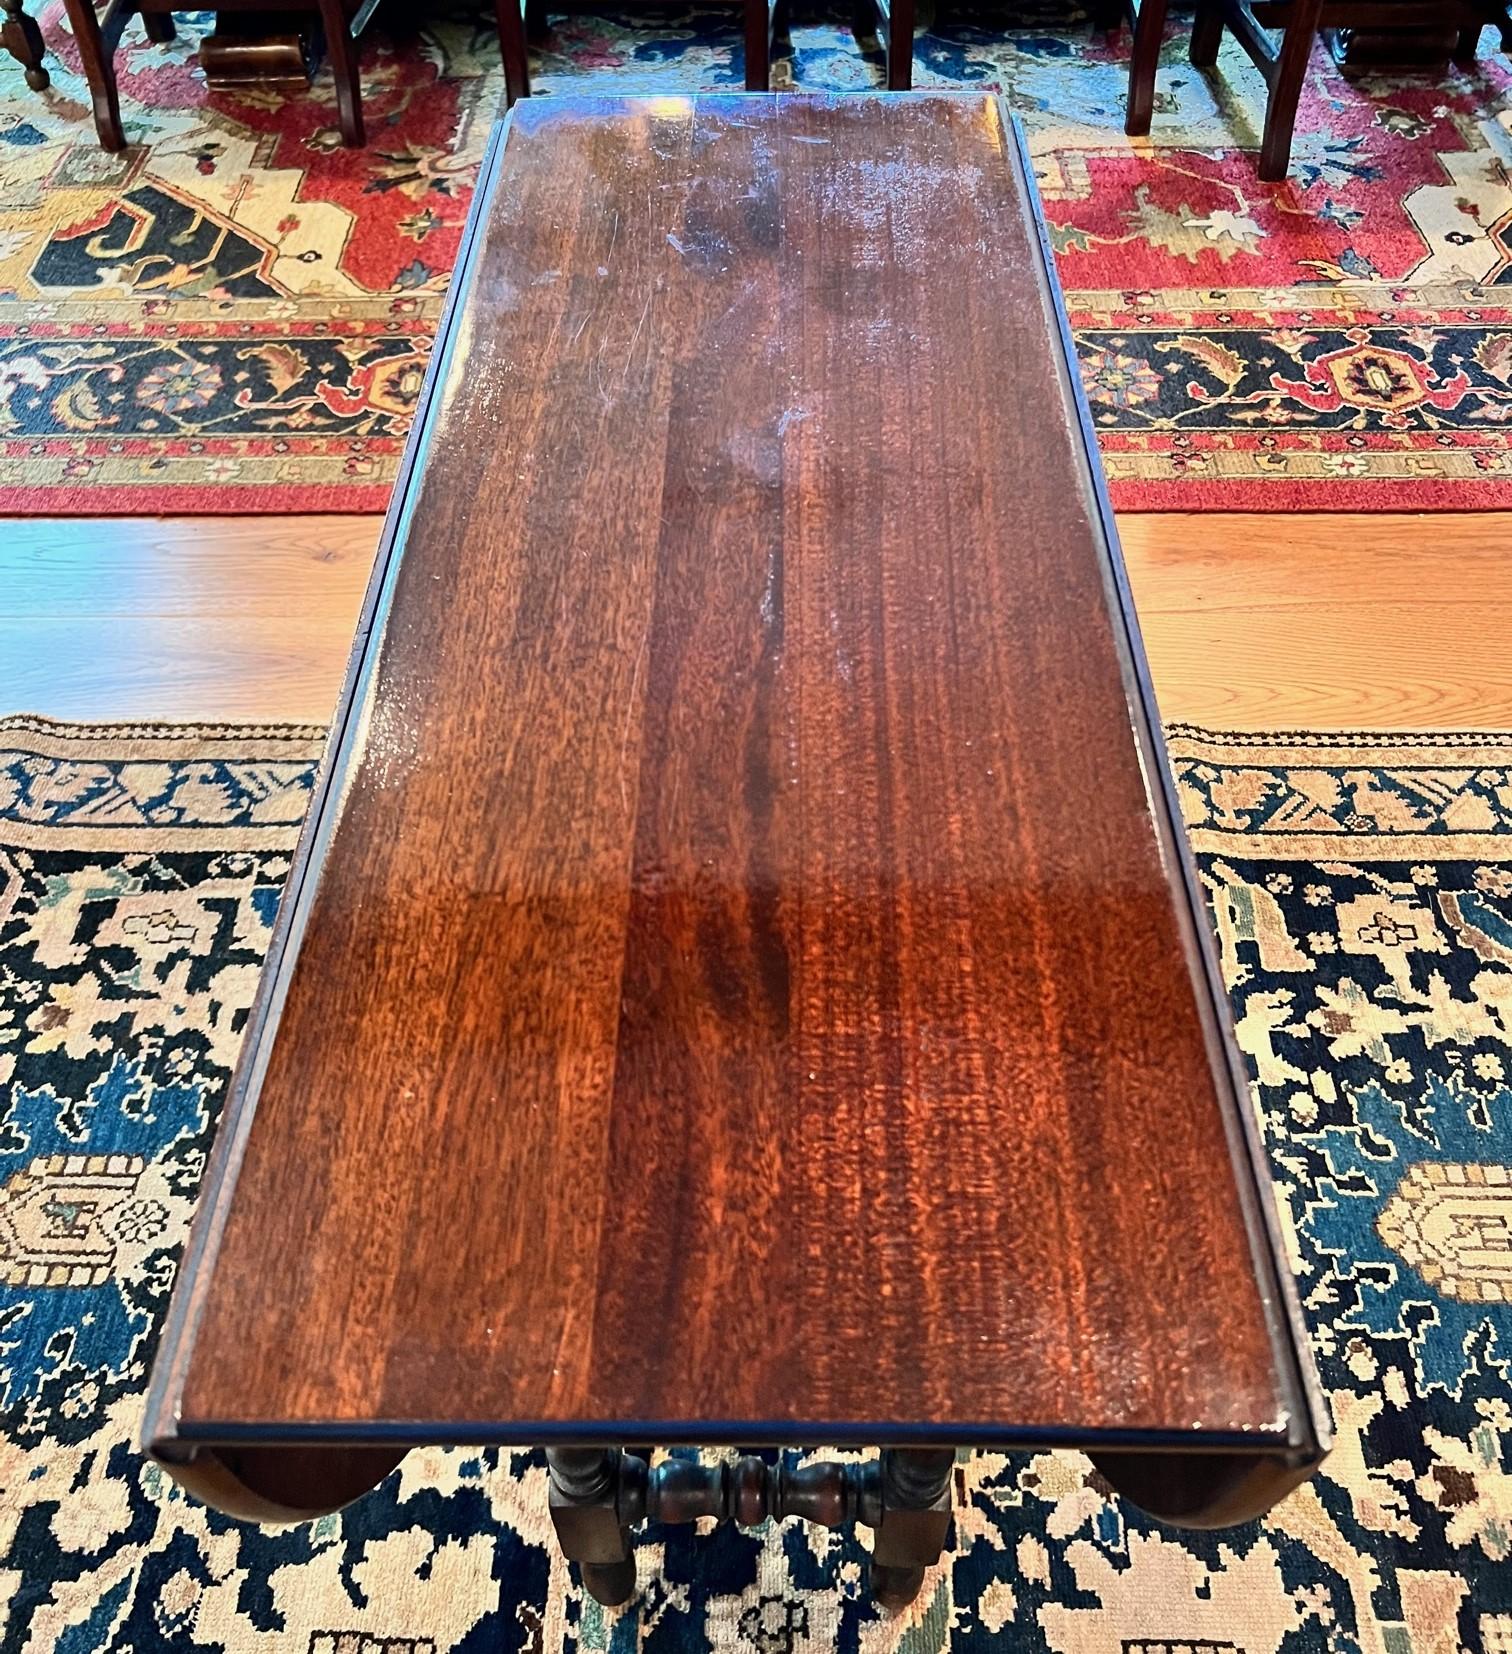 Hand-Crafted Antique Mahogany Oval Victorian Sunderland/Folding Table with Turned Legs For Sale